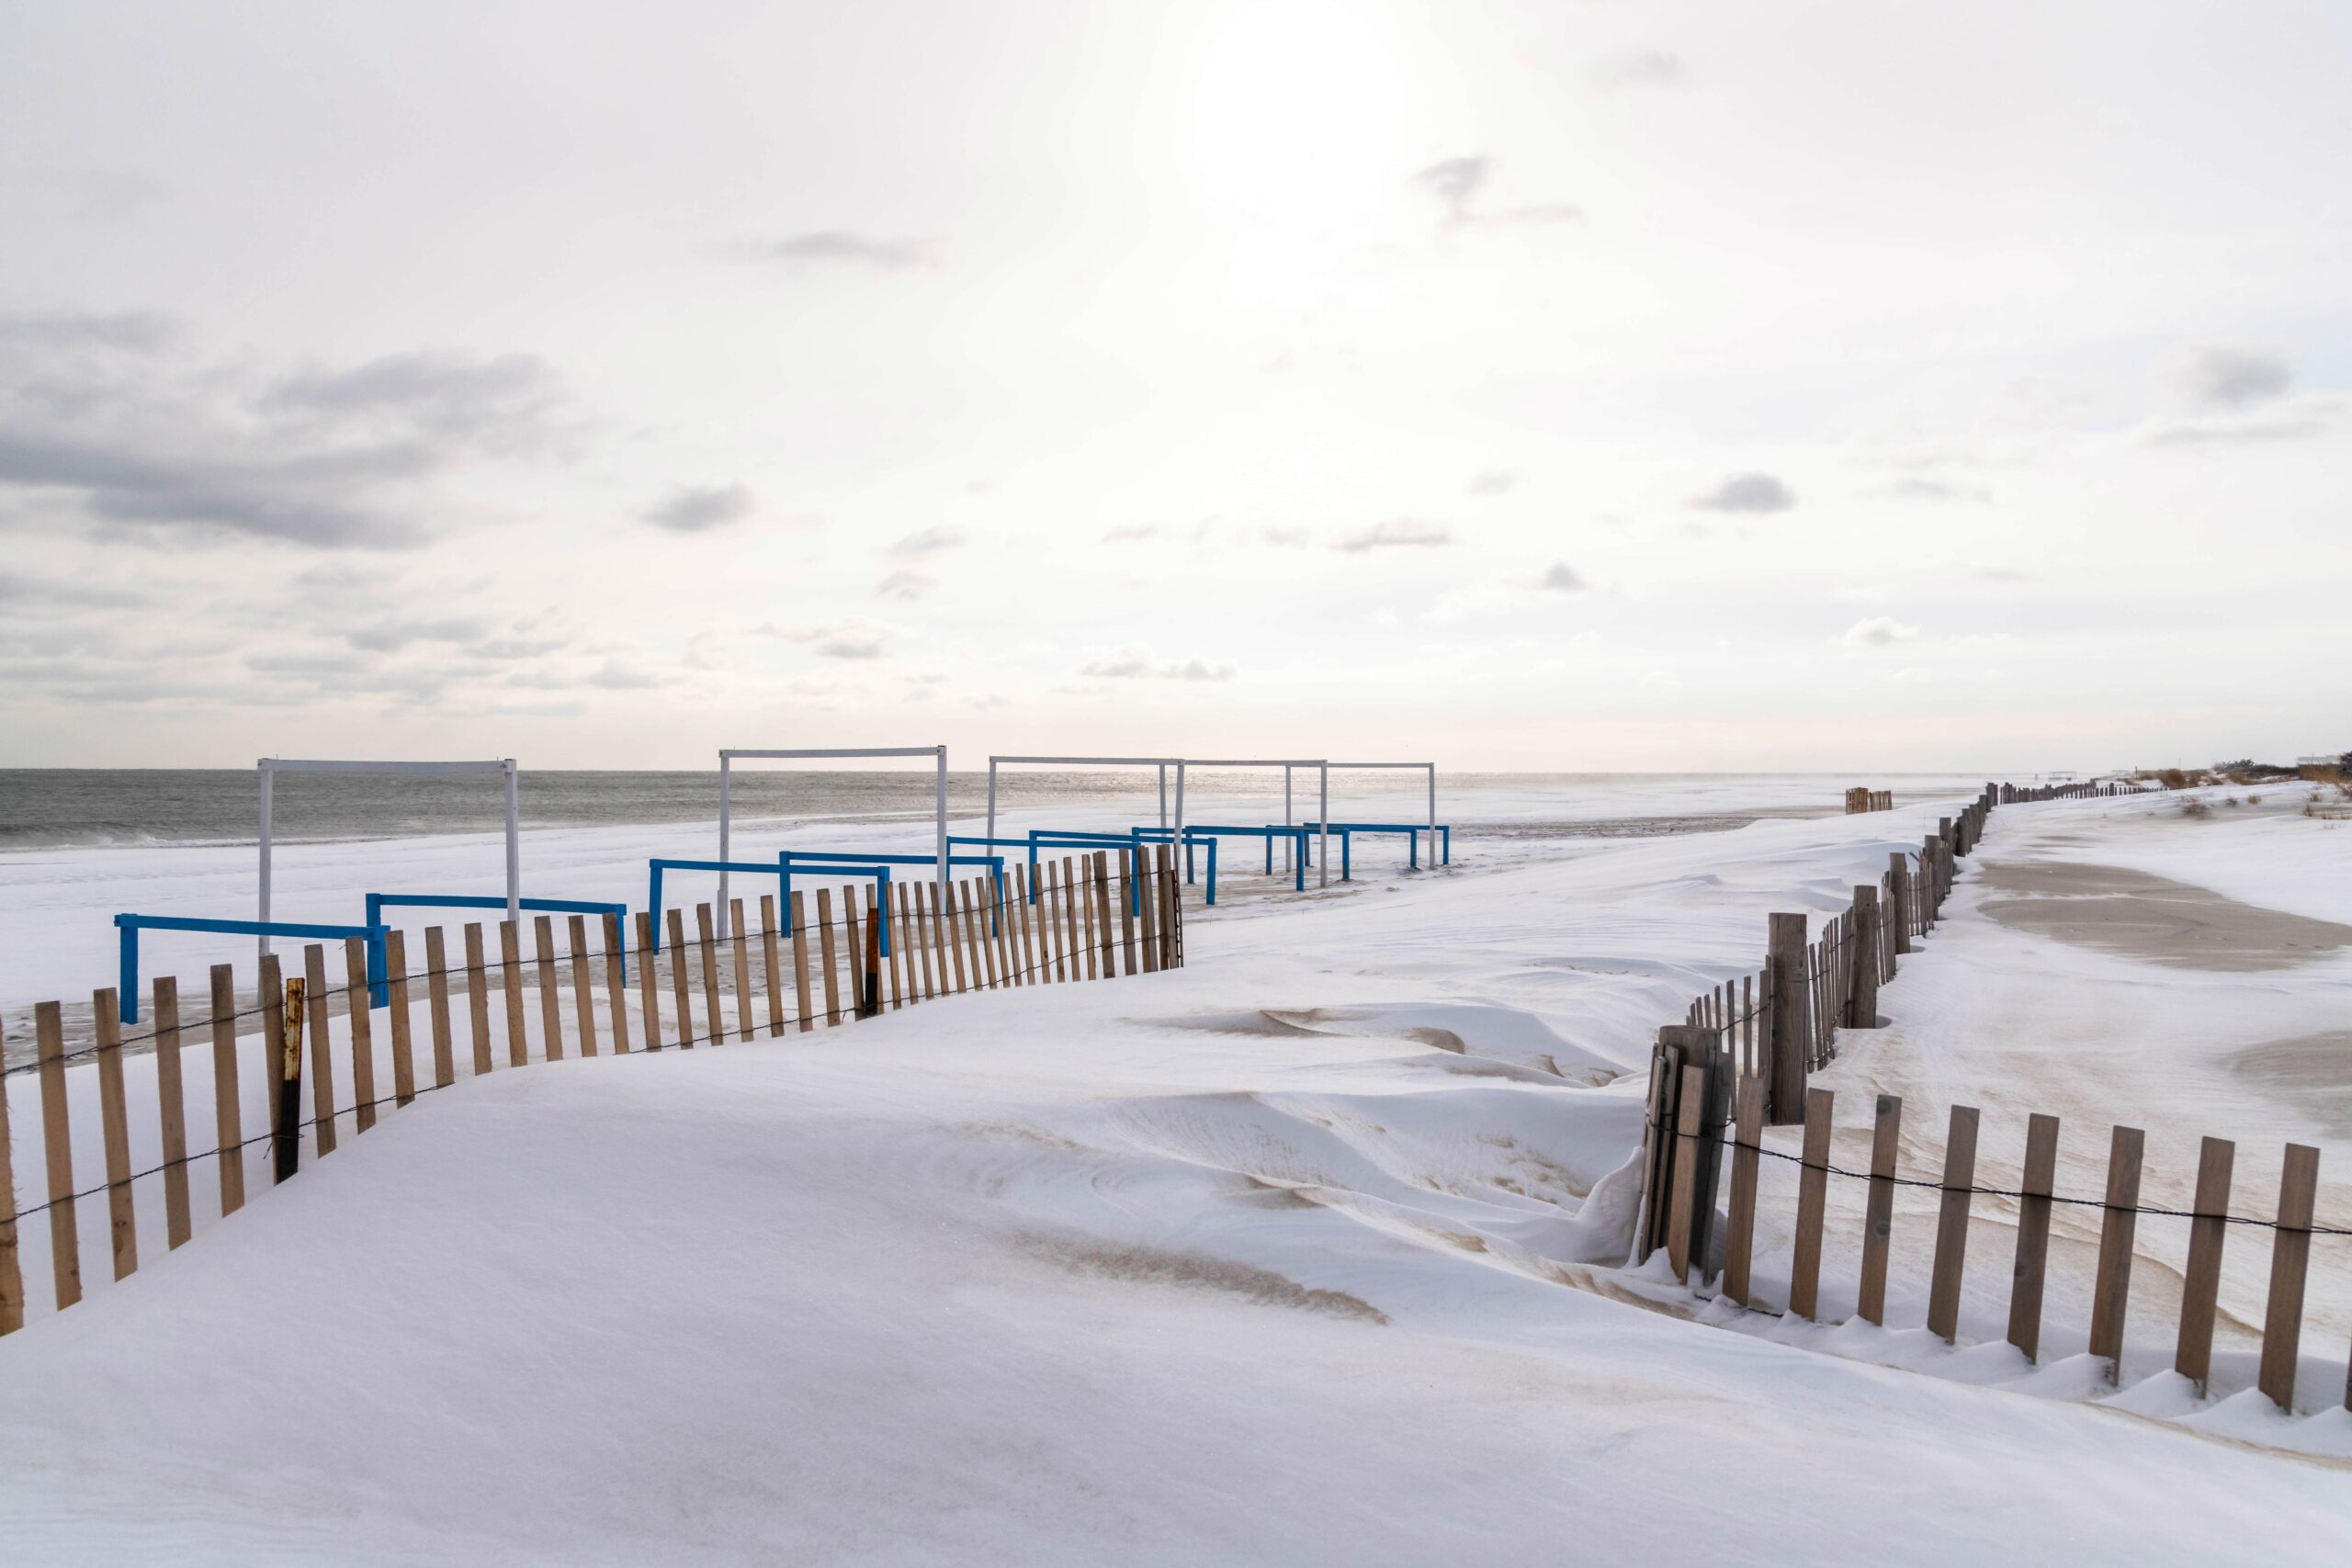 Piles of snow covering wooden fences at the beach entrance with sun streaming through hazy clouds